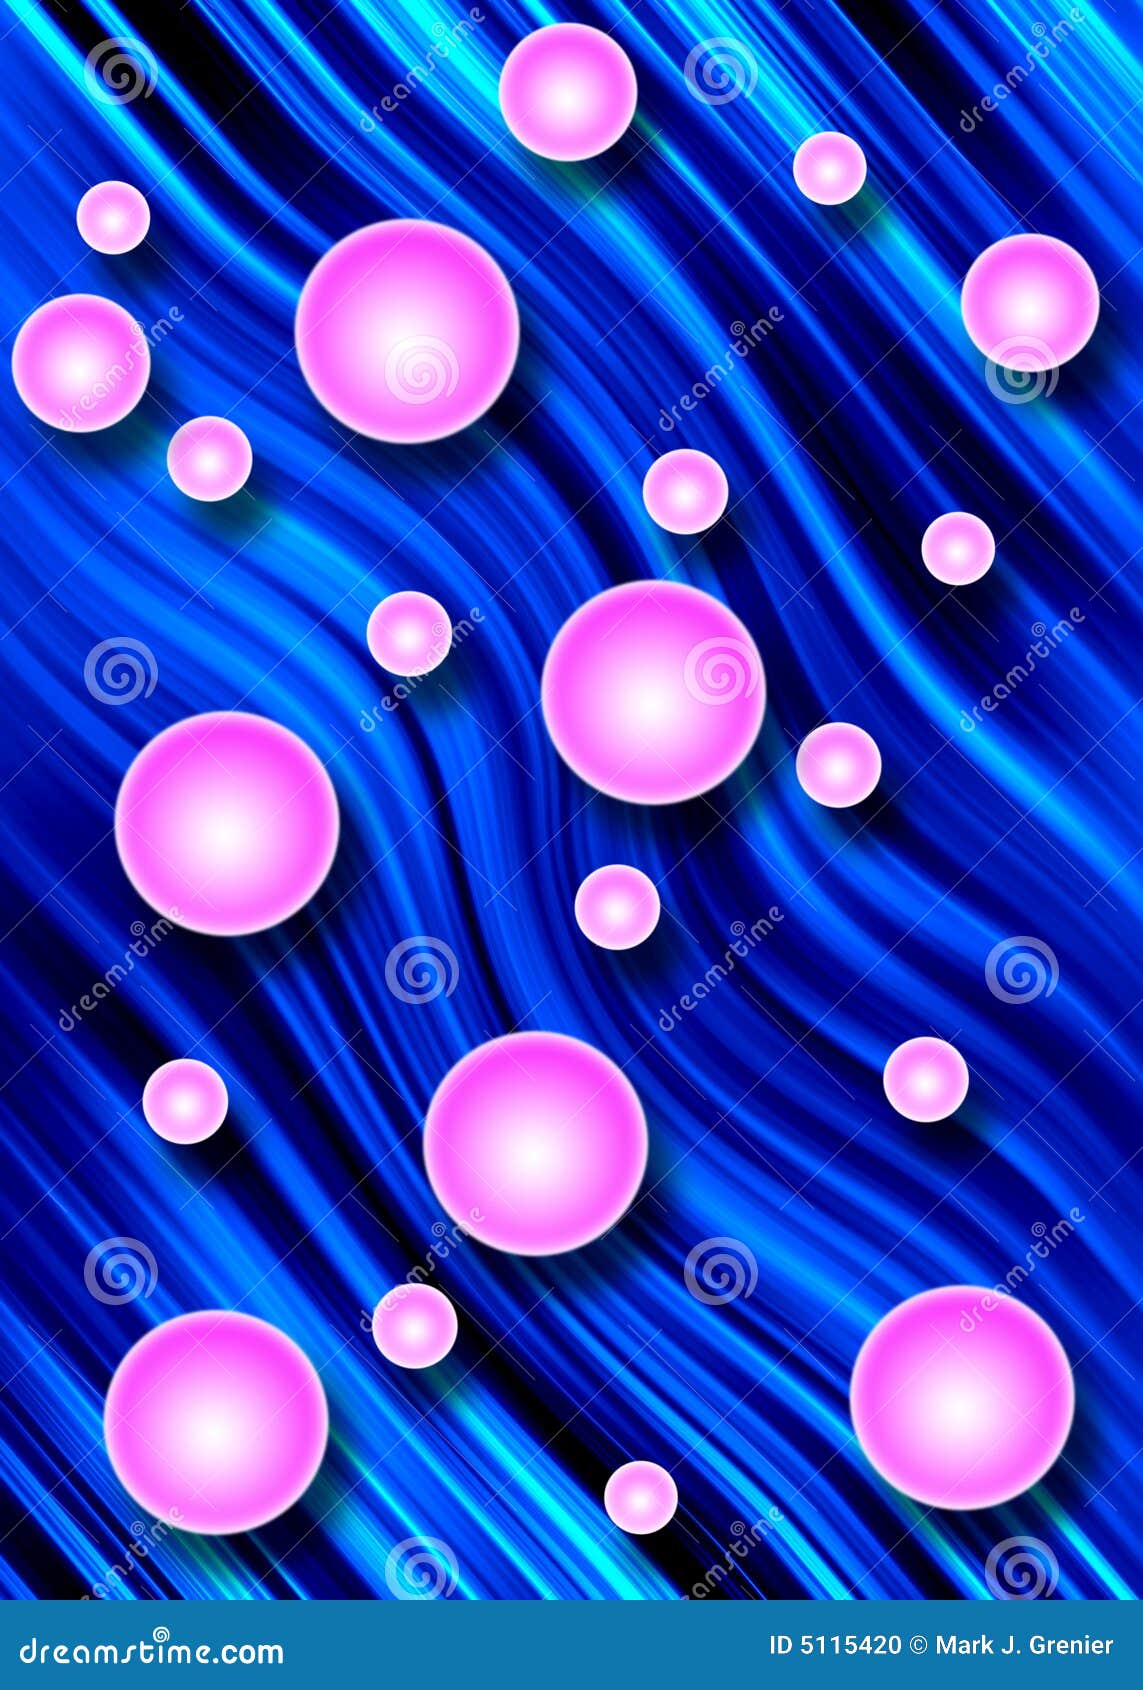 Pink Bubble Background stock illustration. Image of orbs - 5115420